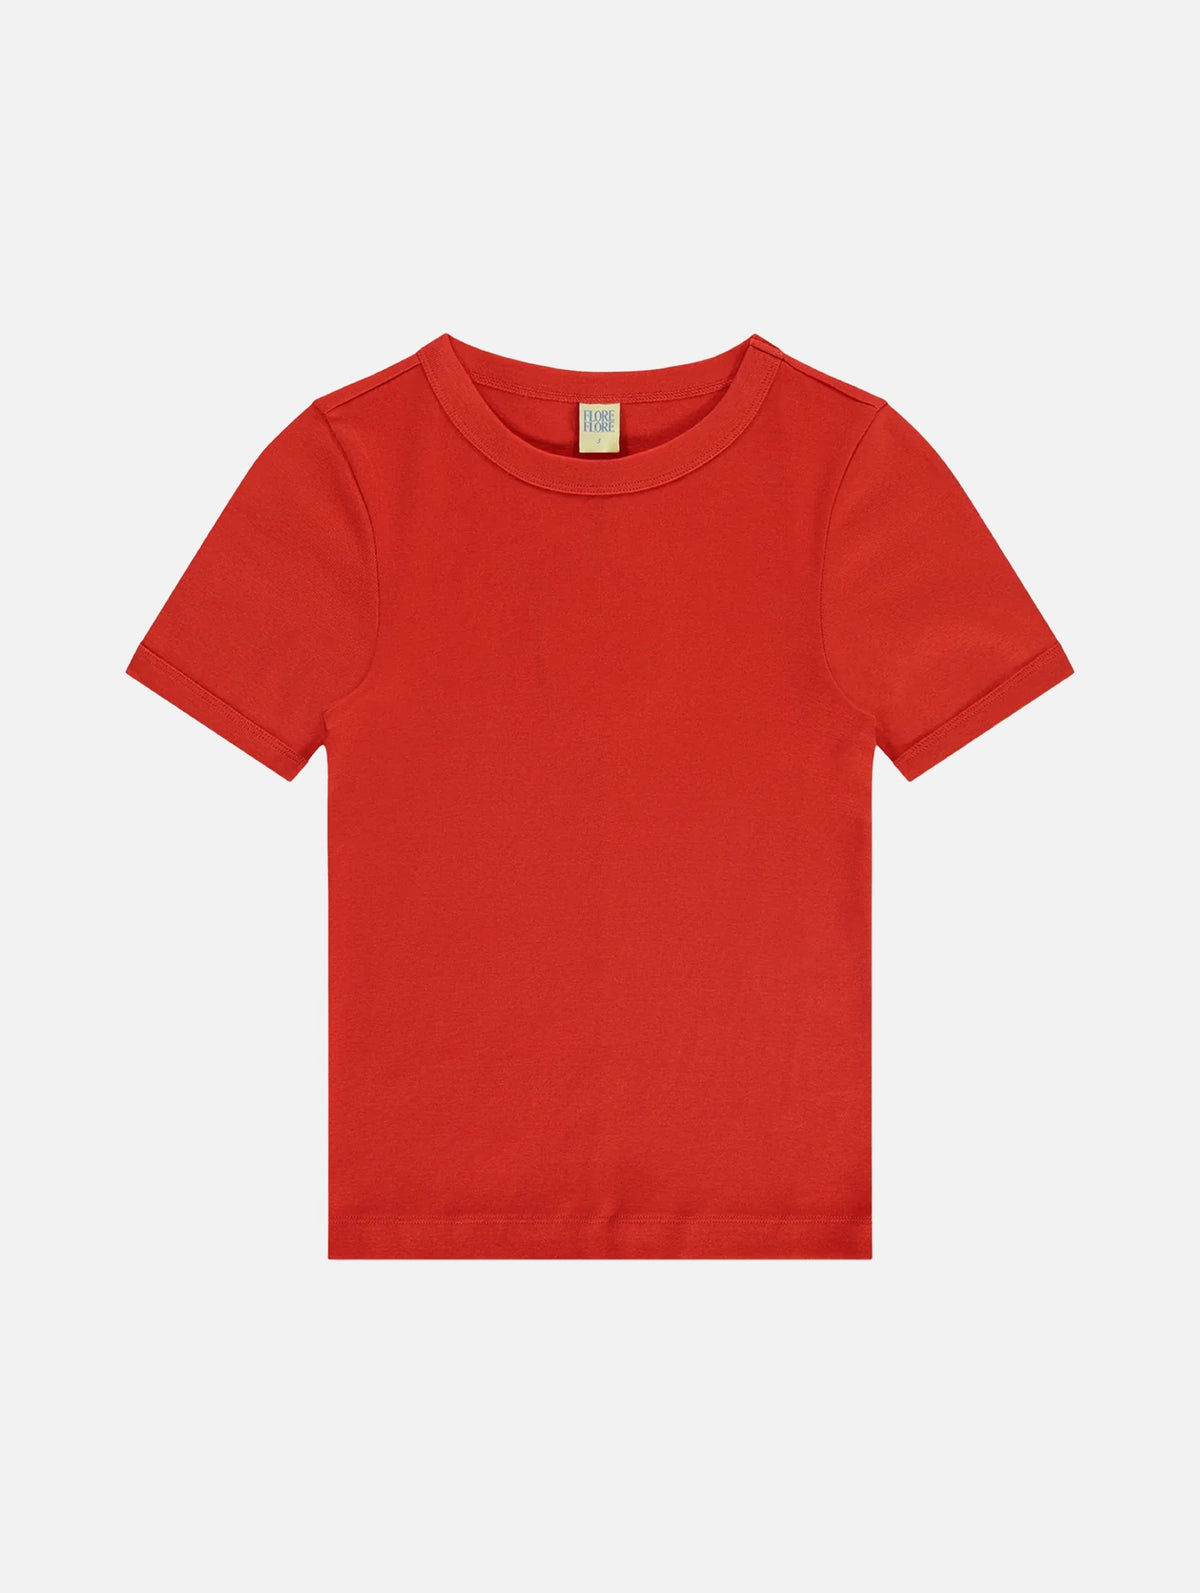 Car Tee in Audrey Red